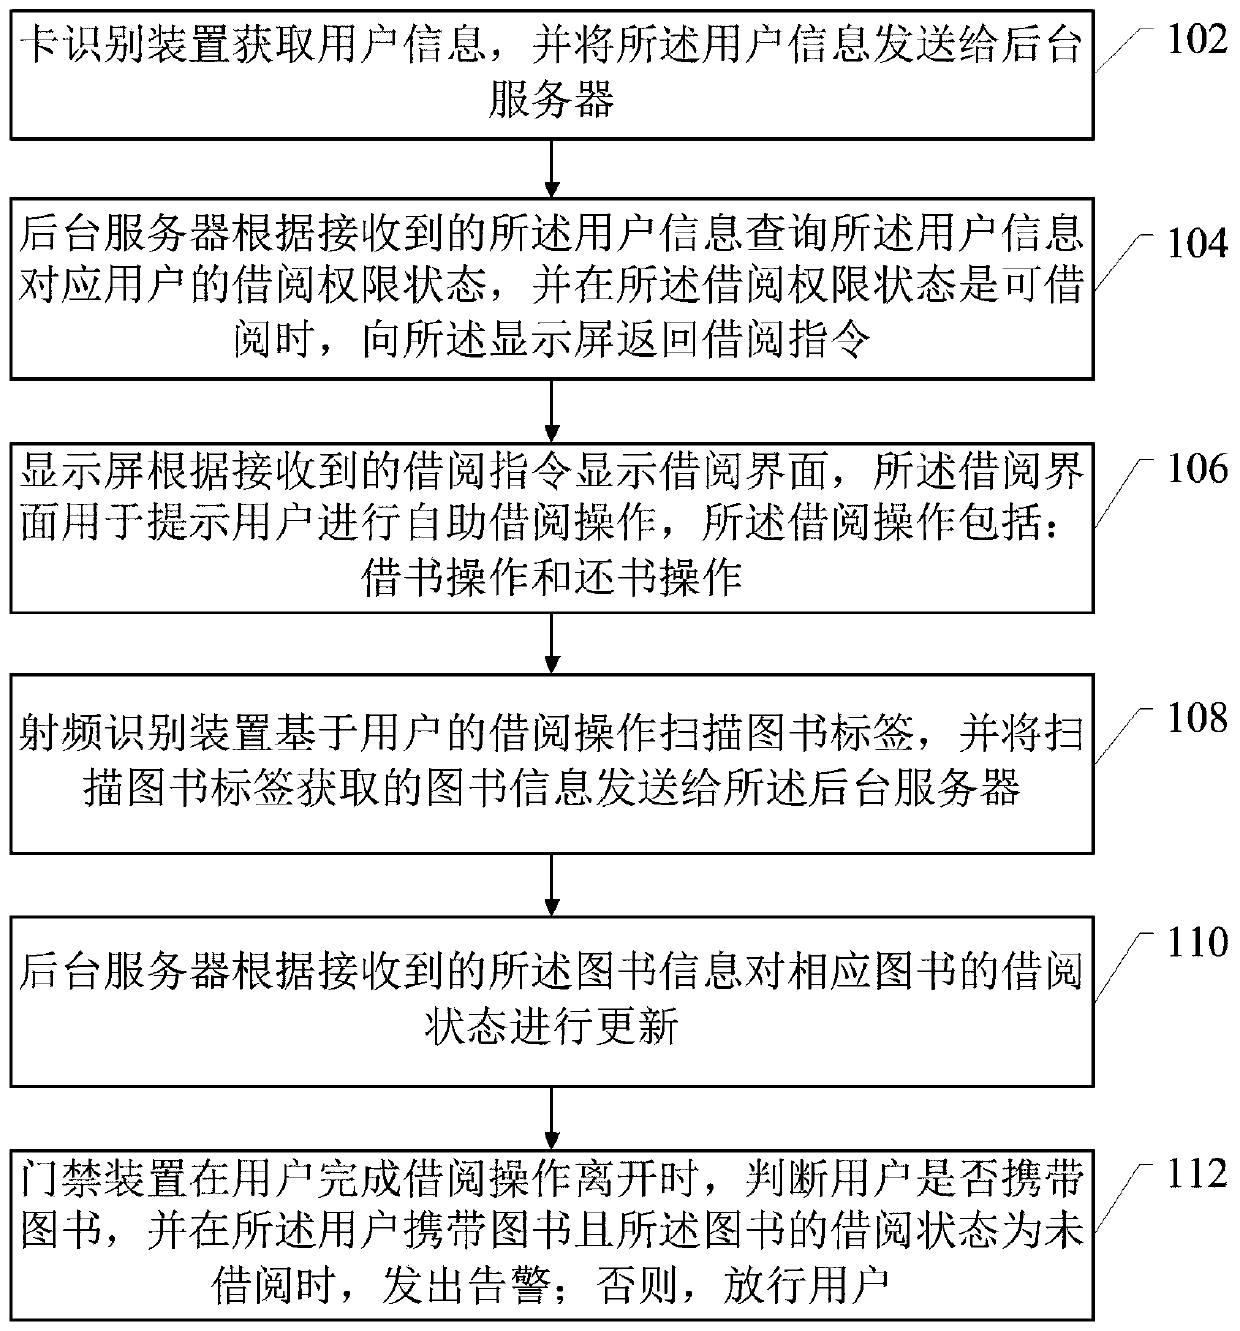 Book management system and method based on radio frequency identification technology